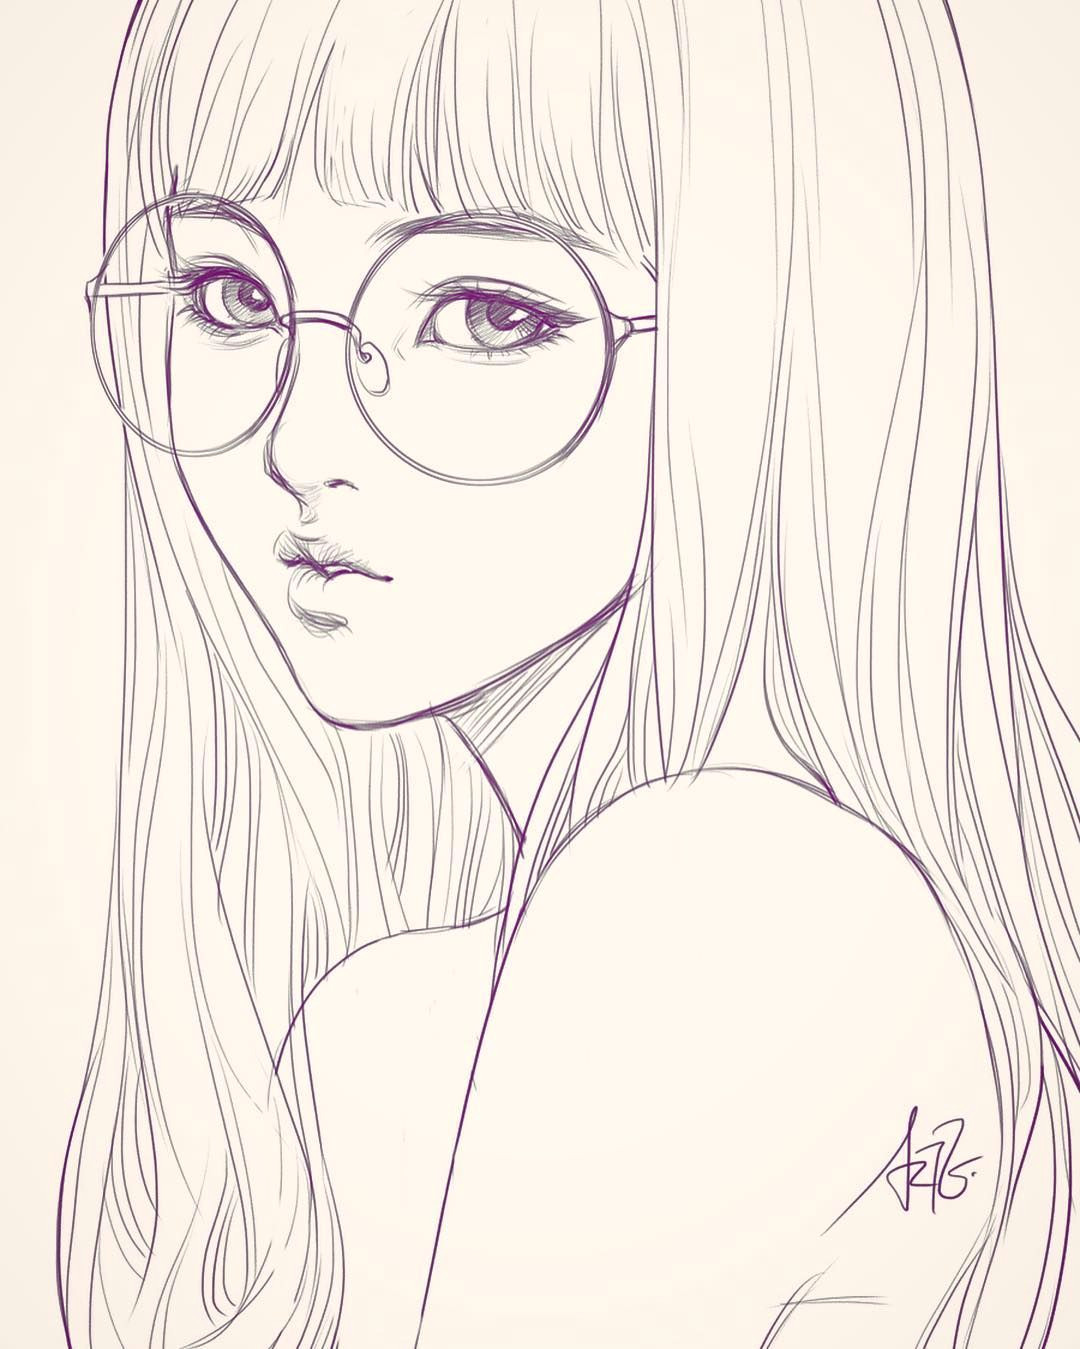 Drawing Anime is Bad Last Sketch Of Girl with Glasses Having Bad Backache It Hurts